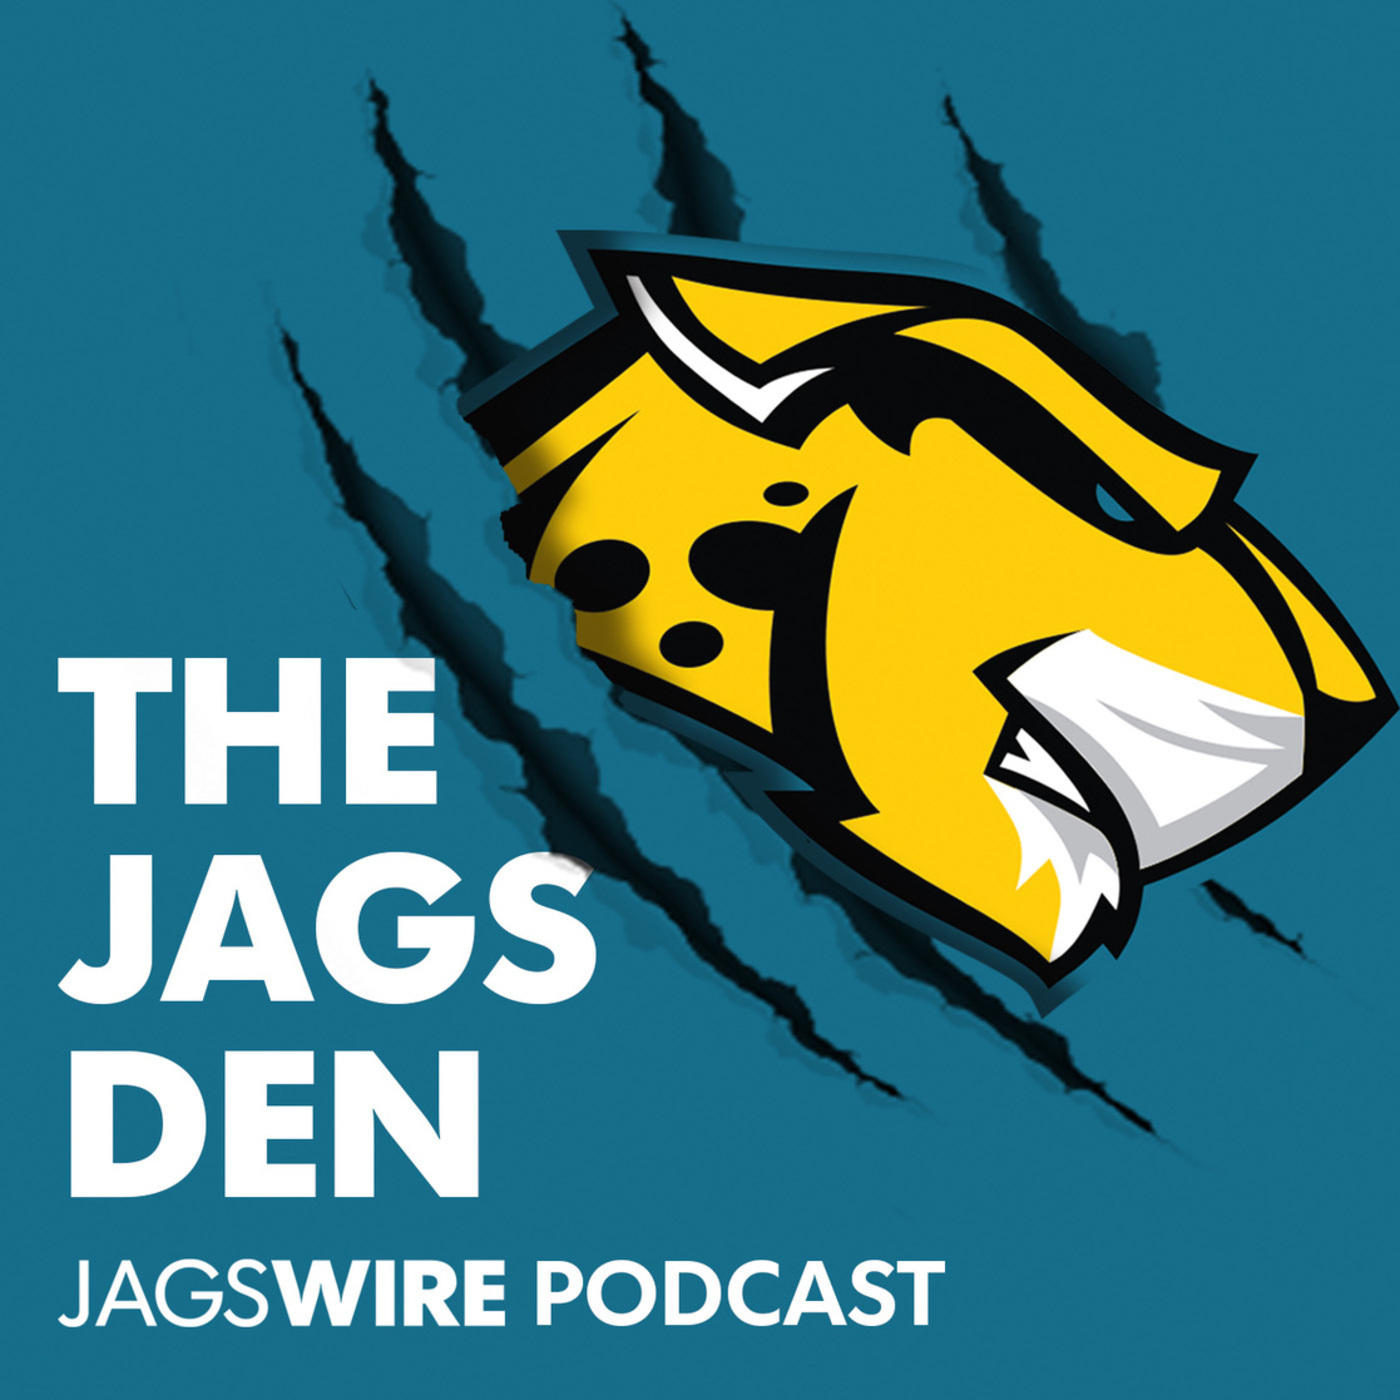 Jags Den Podcast Ep. 27: James discusses Week 1's victory vs. Giants and the keys to defeating the Patriots